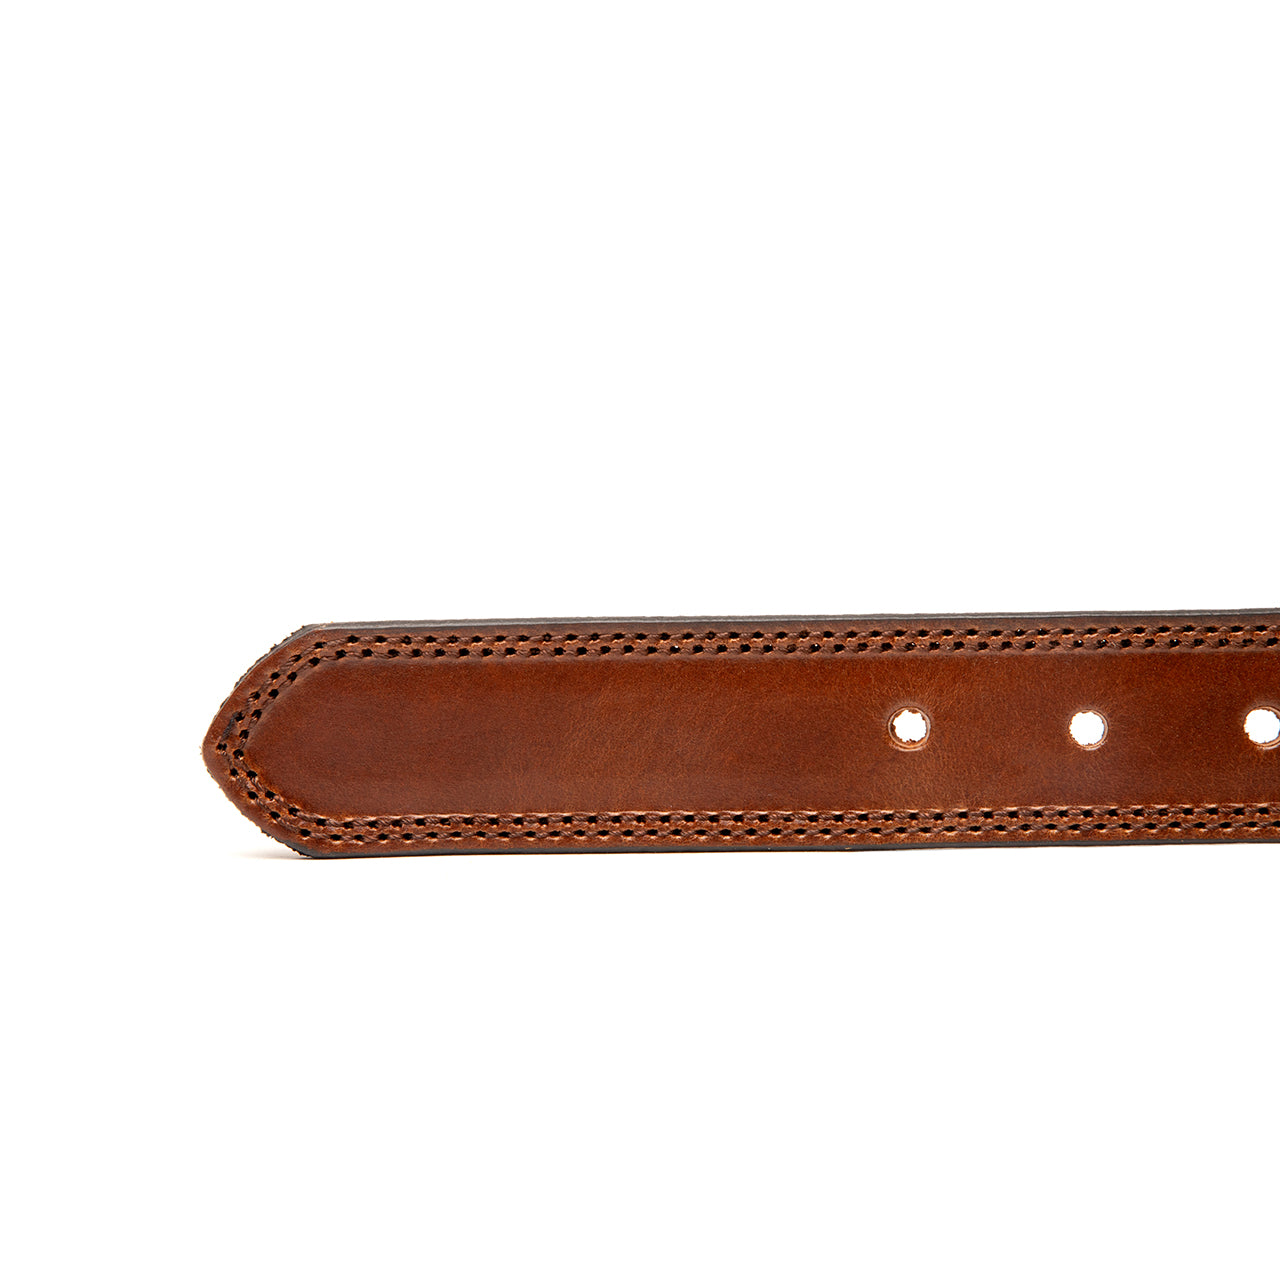 Leather Belt | Cognac Stitch - Quavaro Handcrafted and ethically made ...